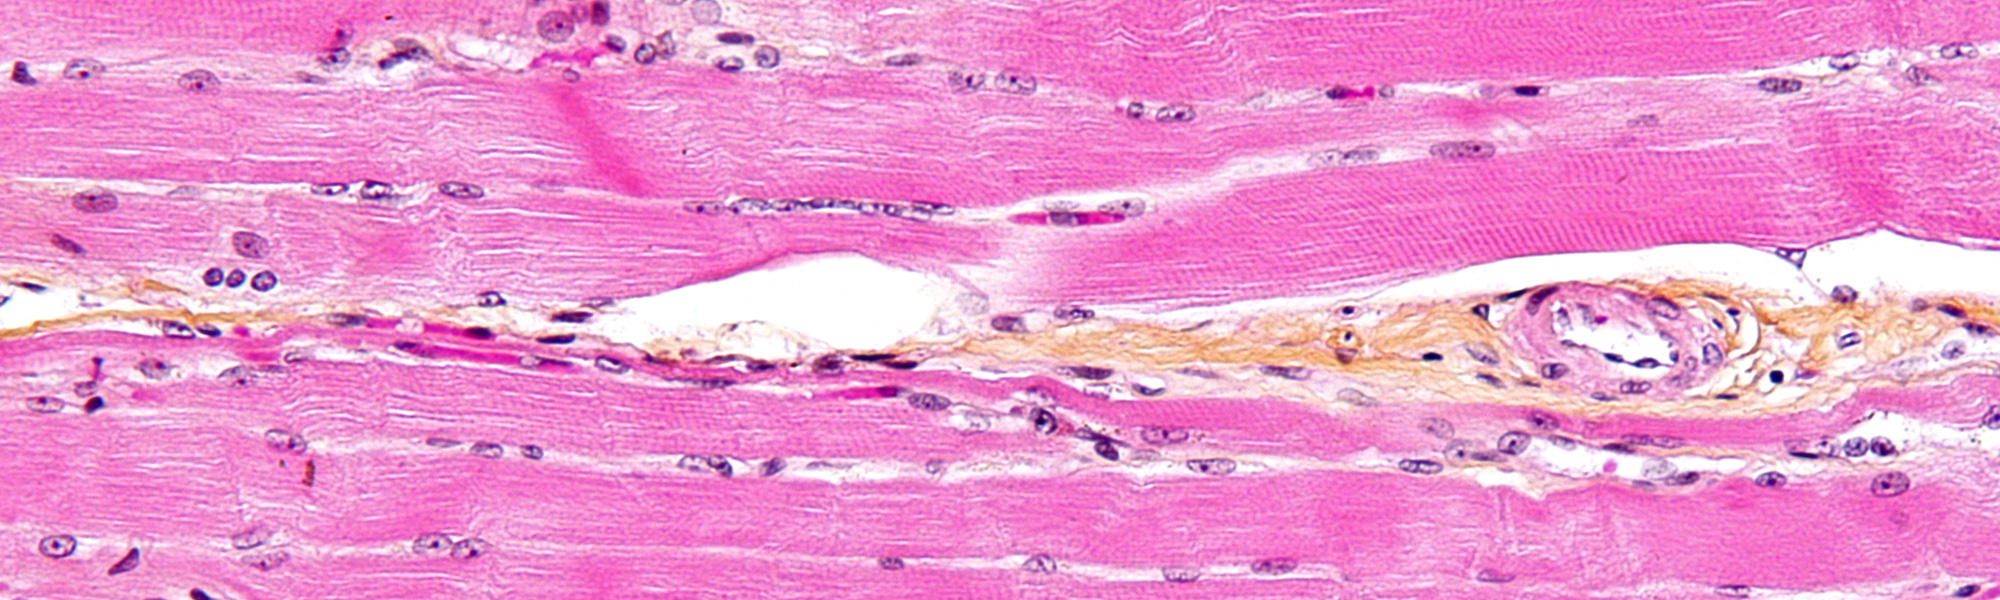 Muscle tissue banner